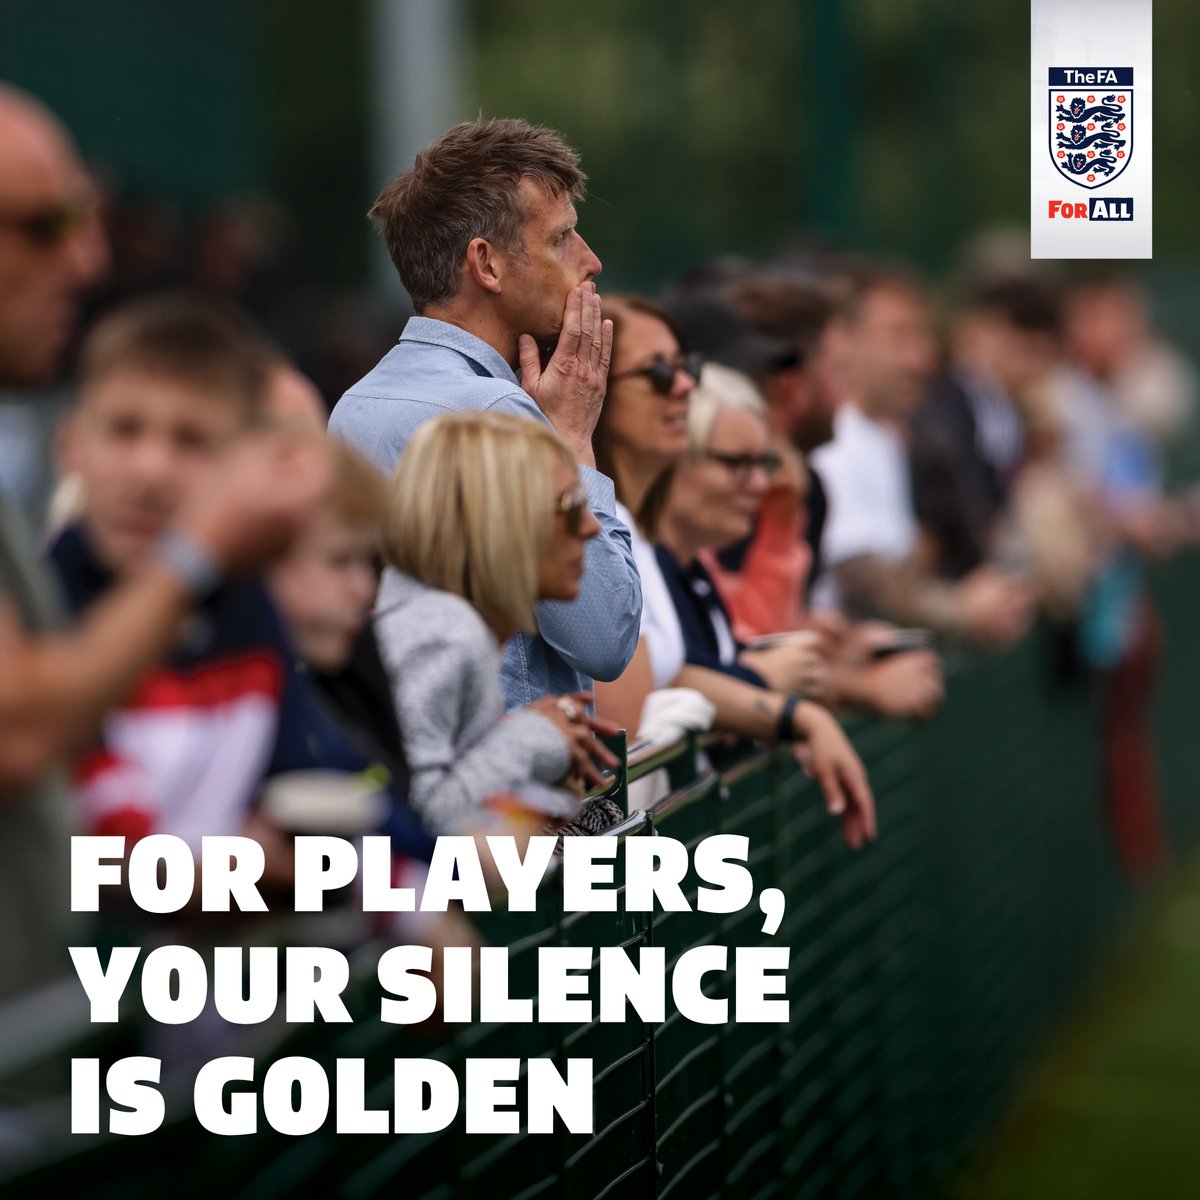 SILENT SUPPORT WEEKEND

2 - 3 March 2024

Turn the noise off and watch our players turn it on. 
During all our games this coming weekend, spectators only applaud, giving players freedom to express their own game.

#SilentSupportWeekend

More information can be found using the